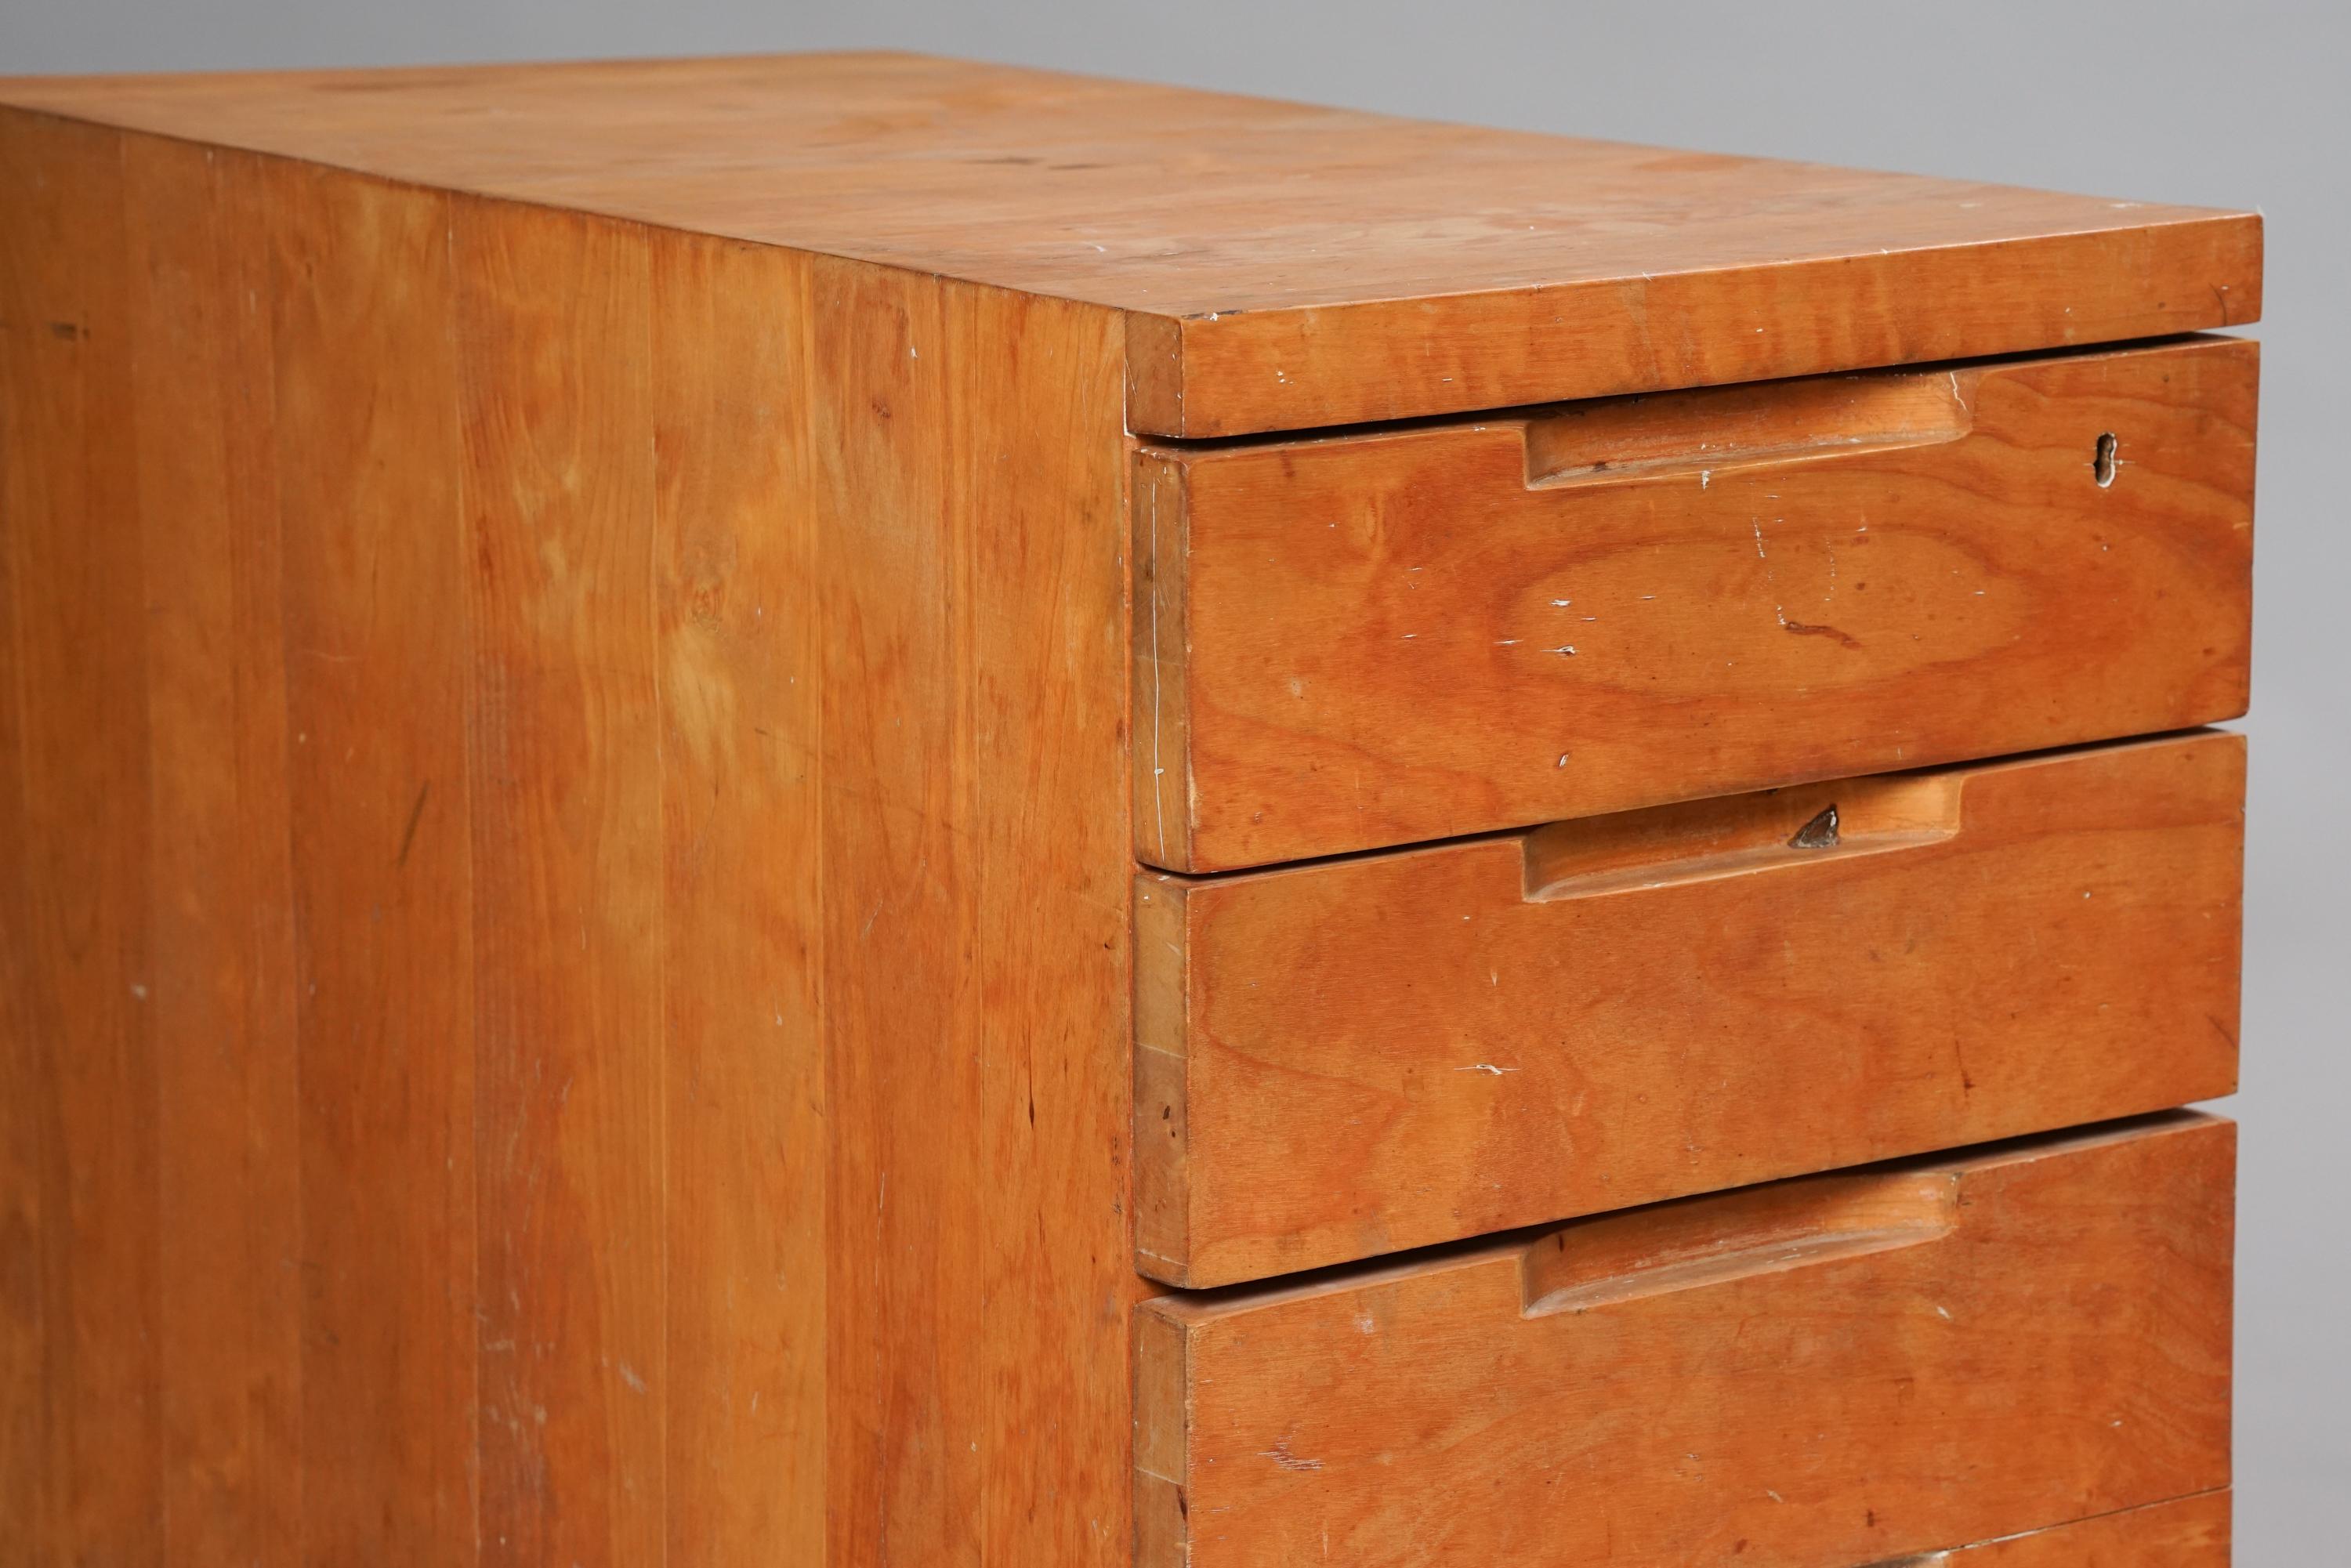 Model HB96 chest of drawers, design by Alvar Aalto, manufactured by Oy Huonekalu- ja Rakennustyötehdas AB, 1930s. Birch. Good vintage condition, rich patina and wear consistent with age and use. 

Alvar Aalto (1898-1976) is probably the most famous